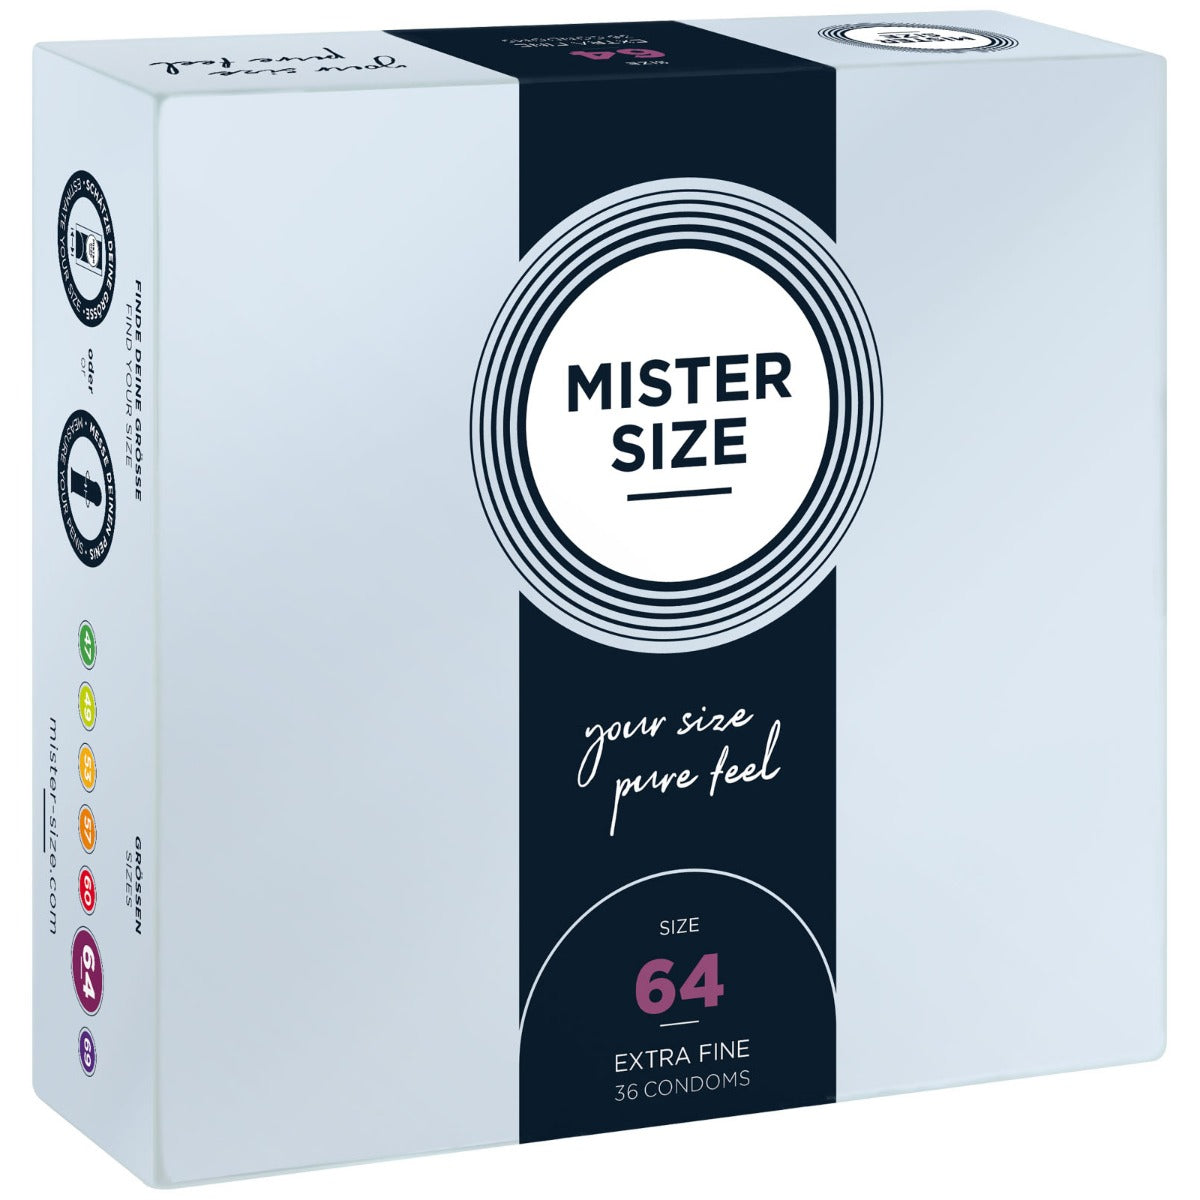 MISTER SIZE | Pure feel Condoms - Size 64 mm (36 pack)